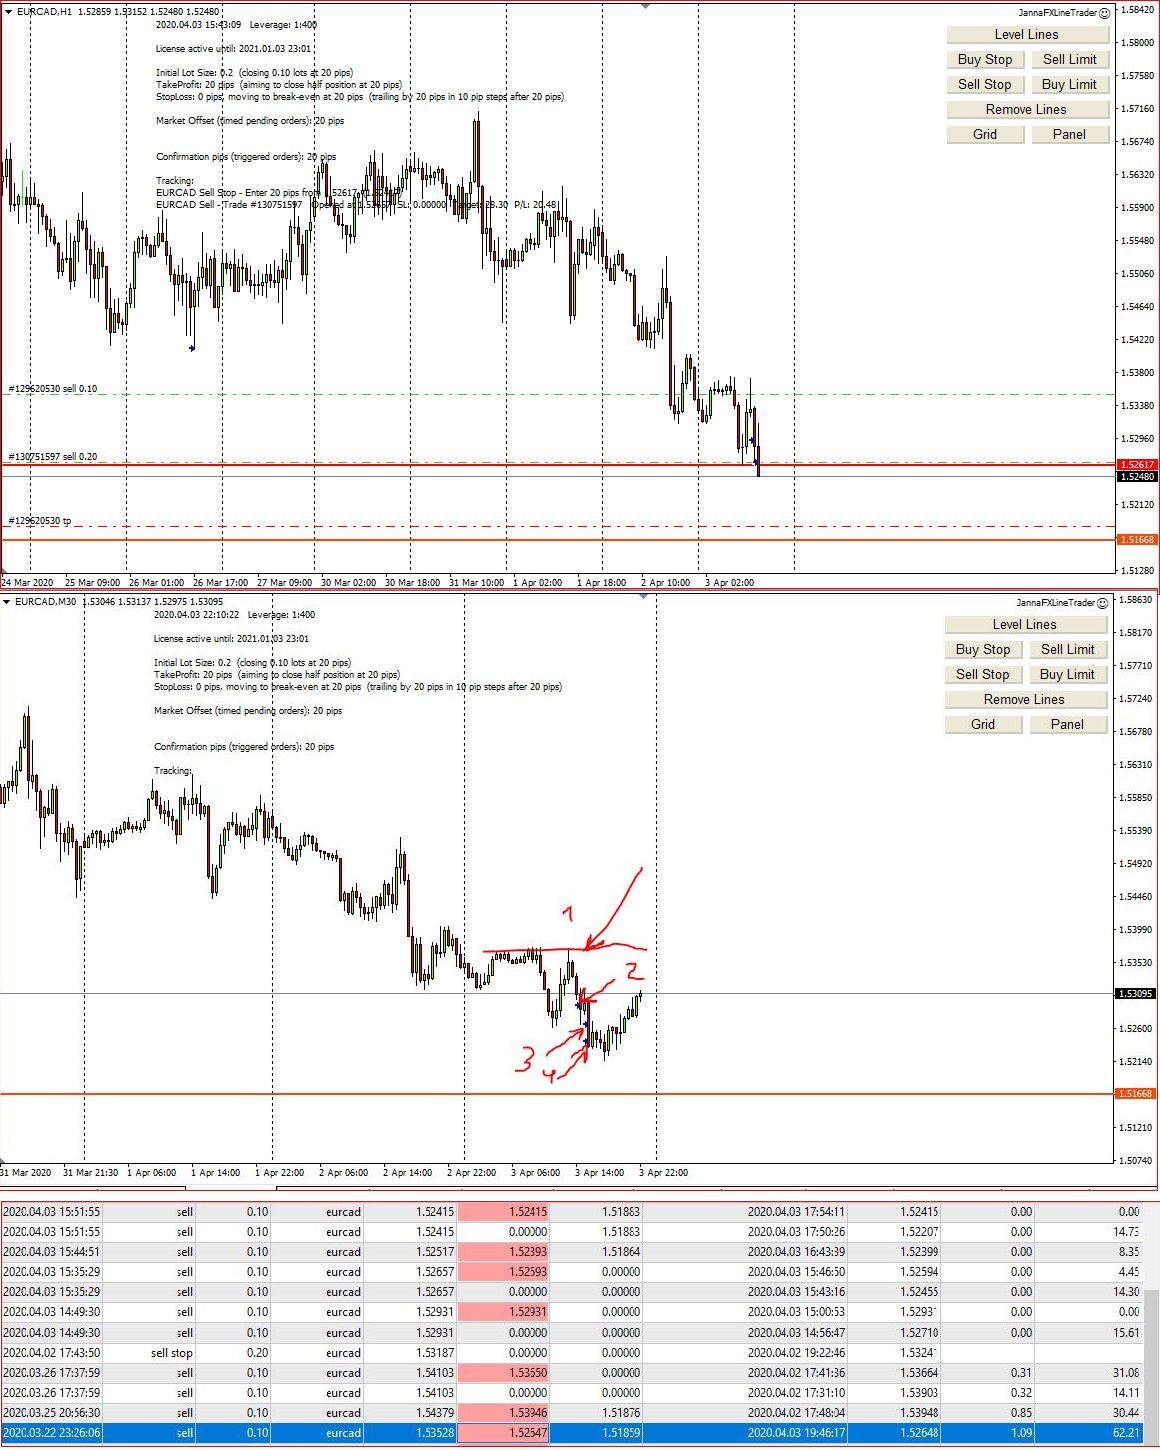 Forex Trading on Friday 03d of March, Examples of My Trades